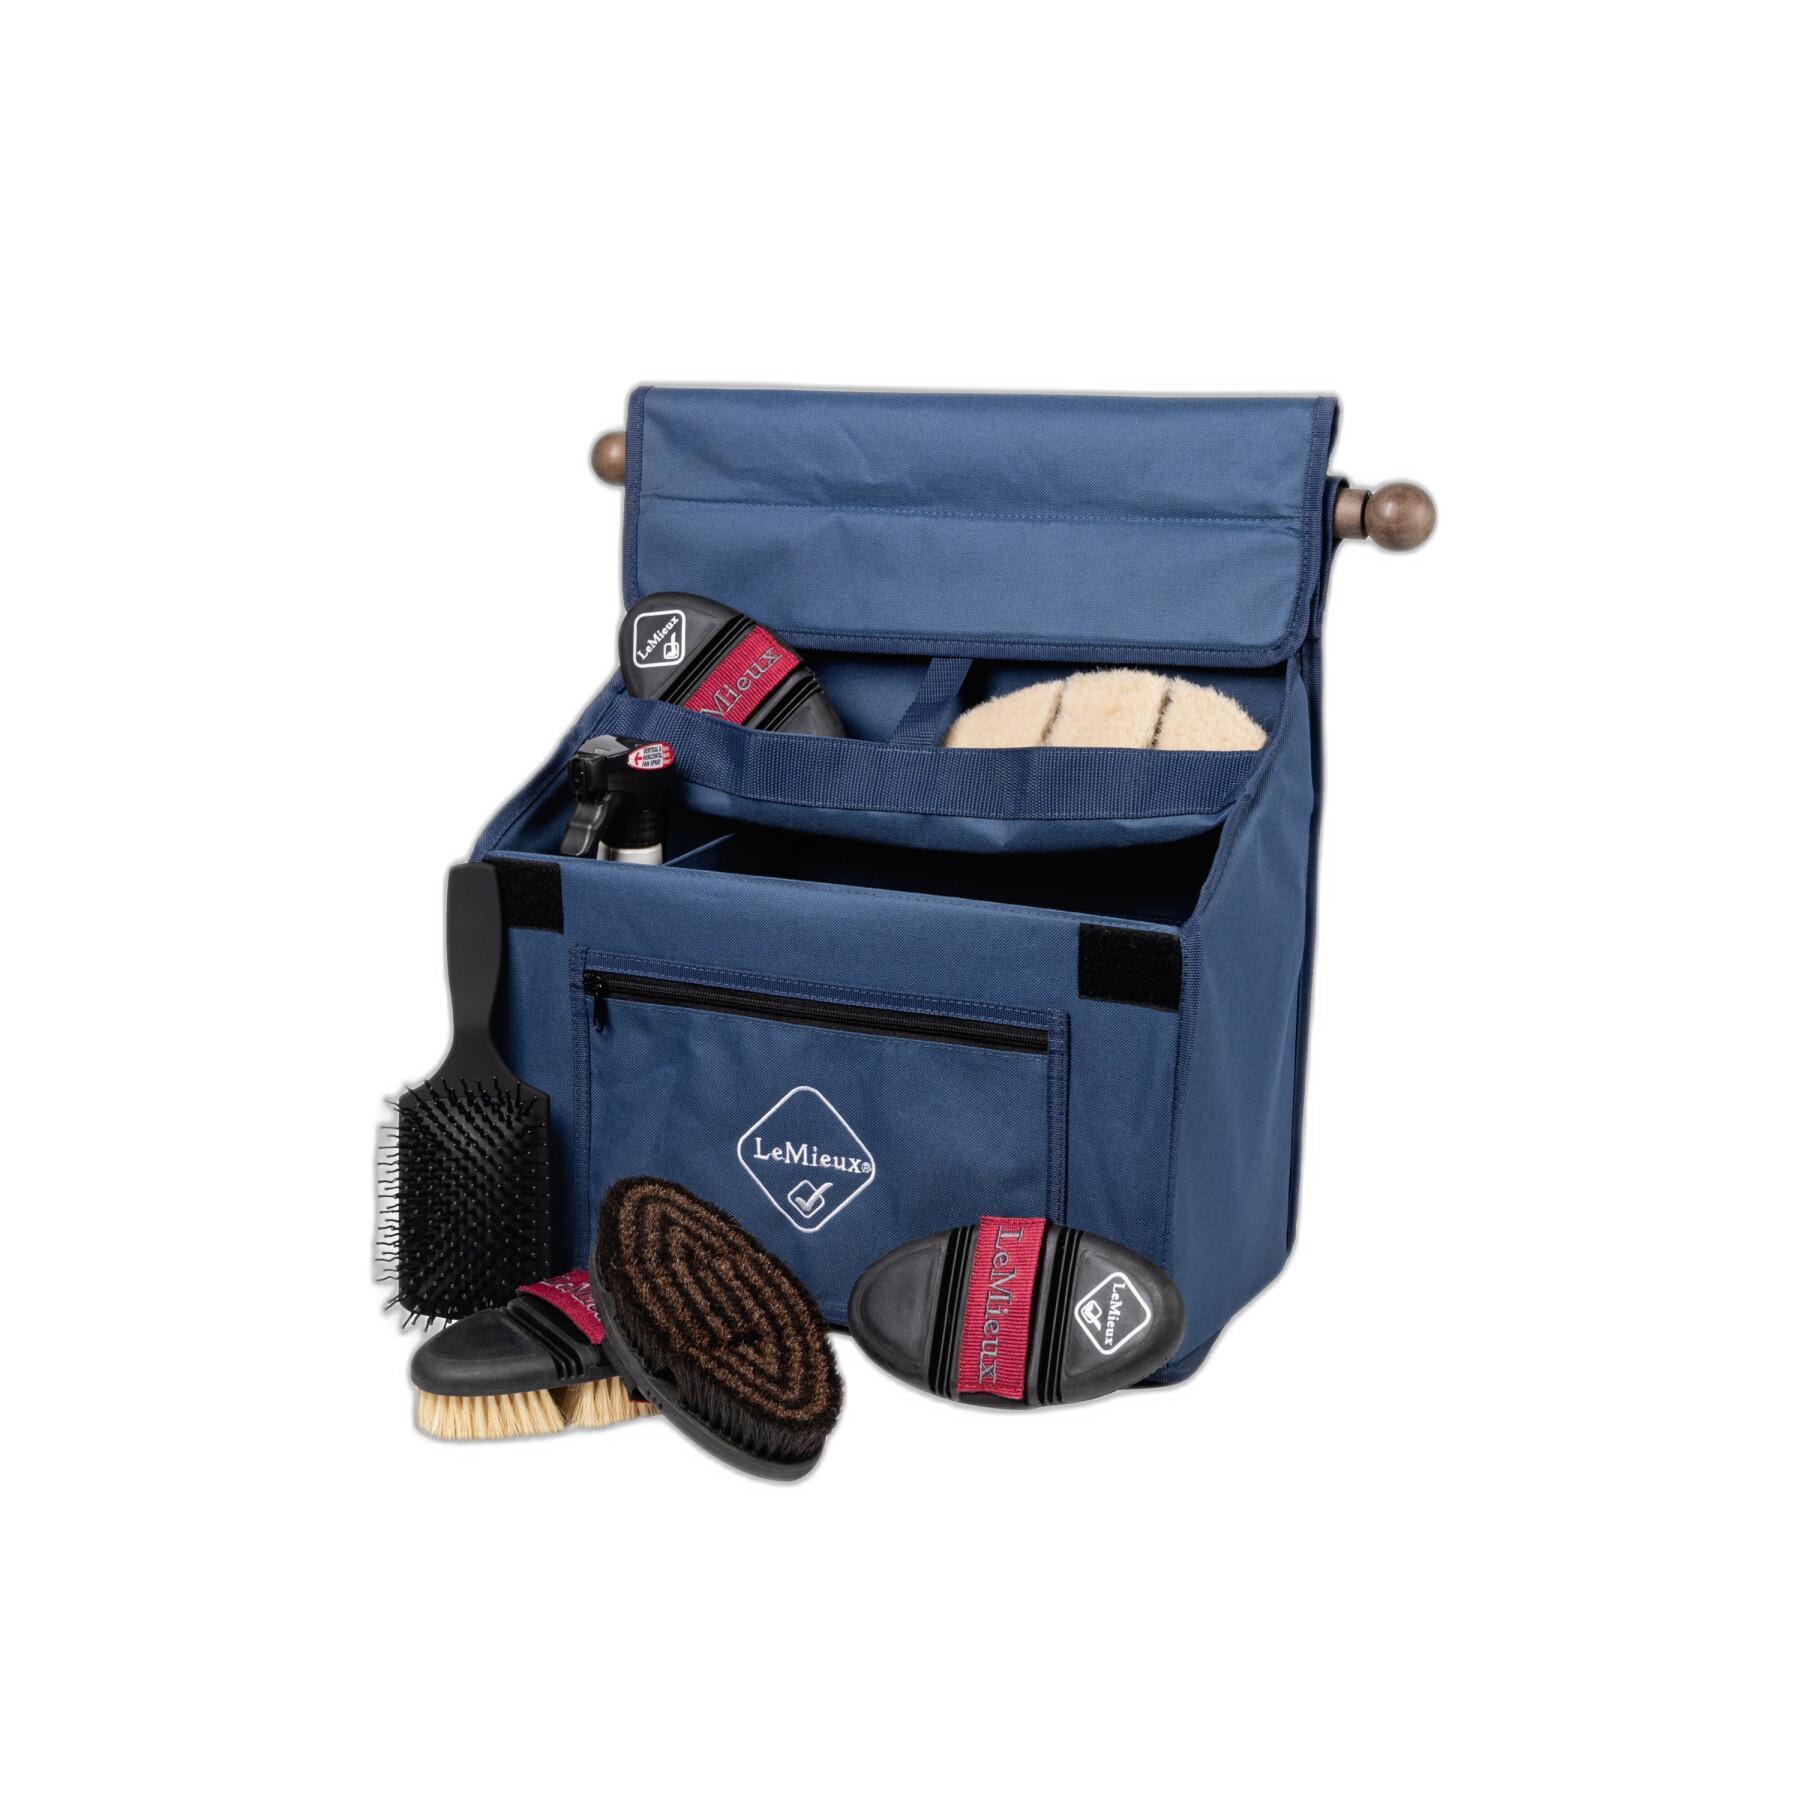 Grooming bag with bar LeMieux